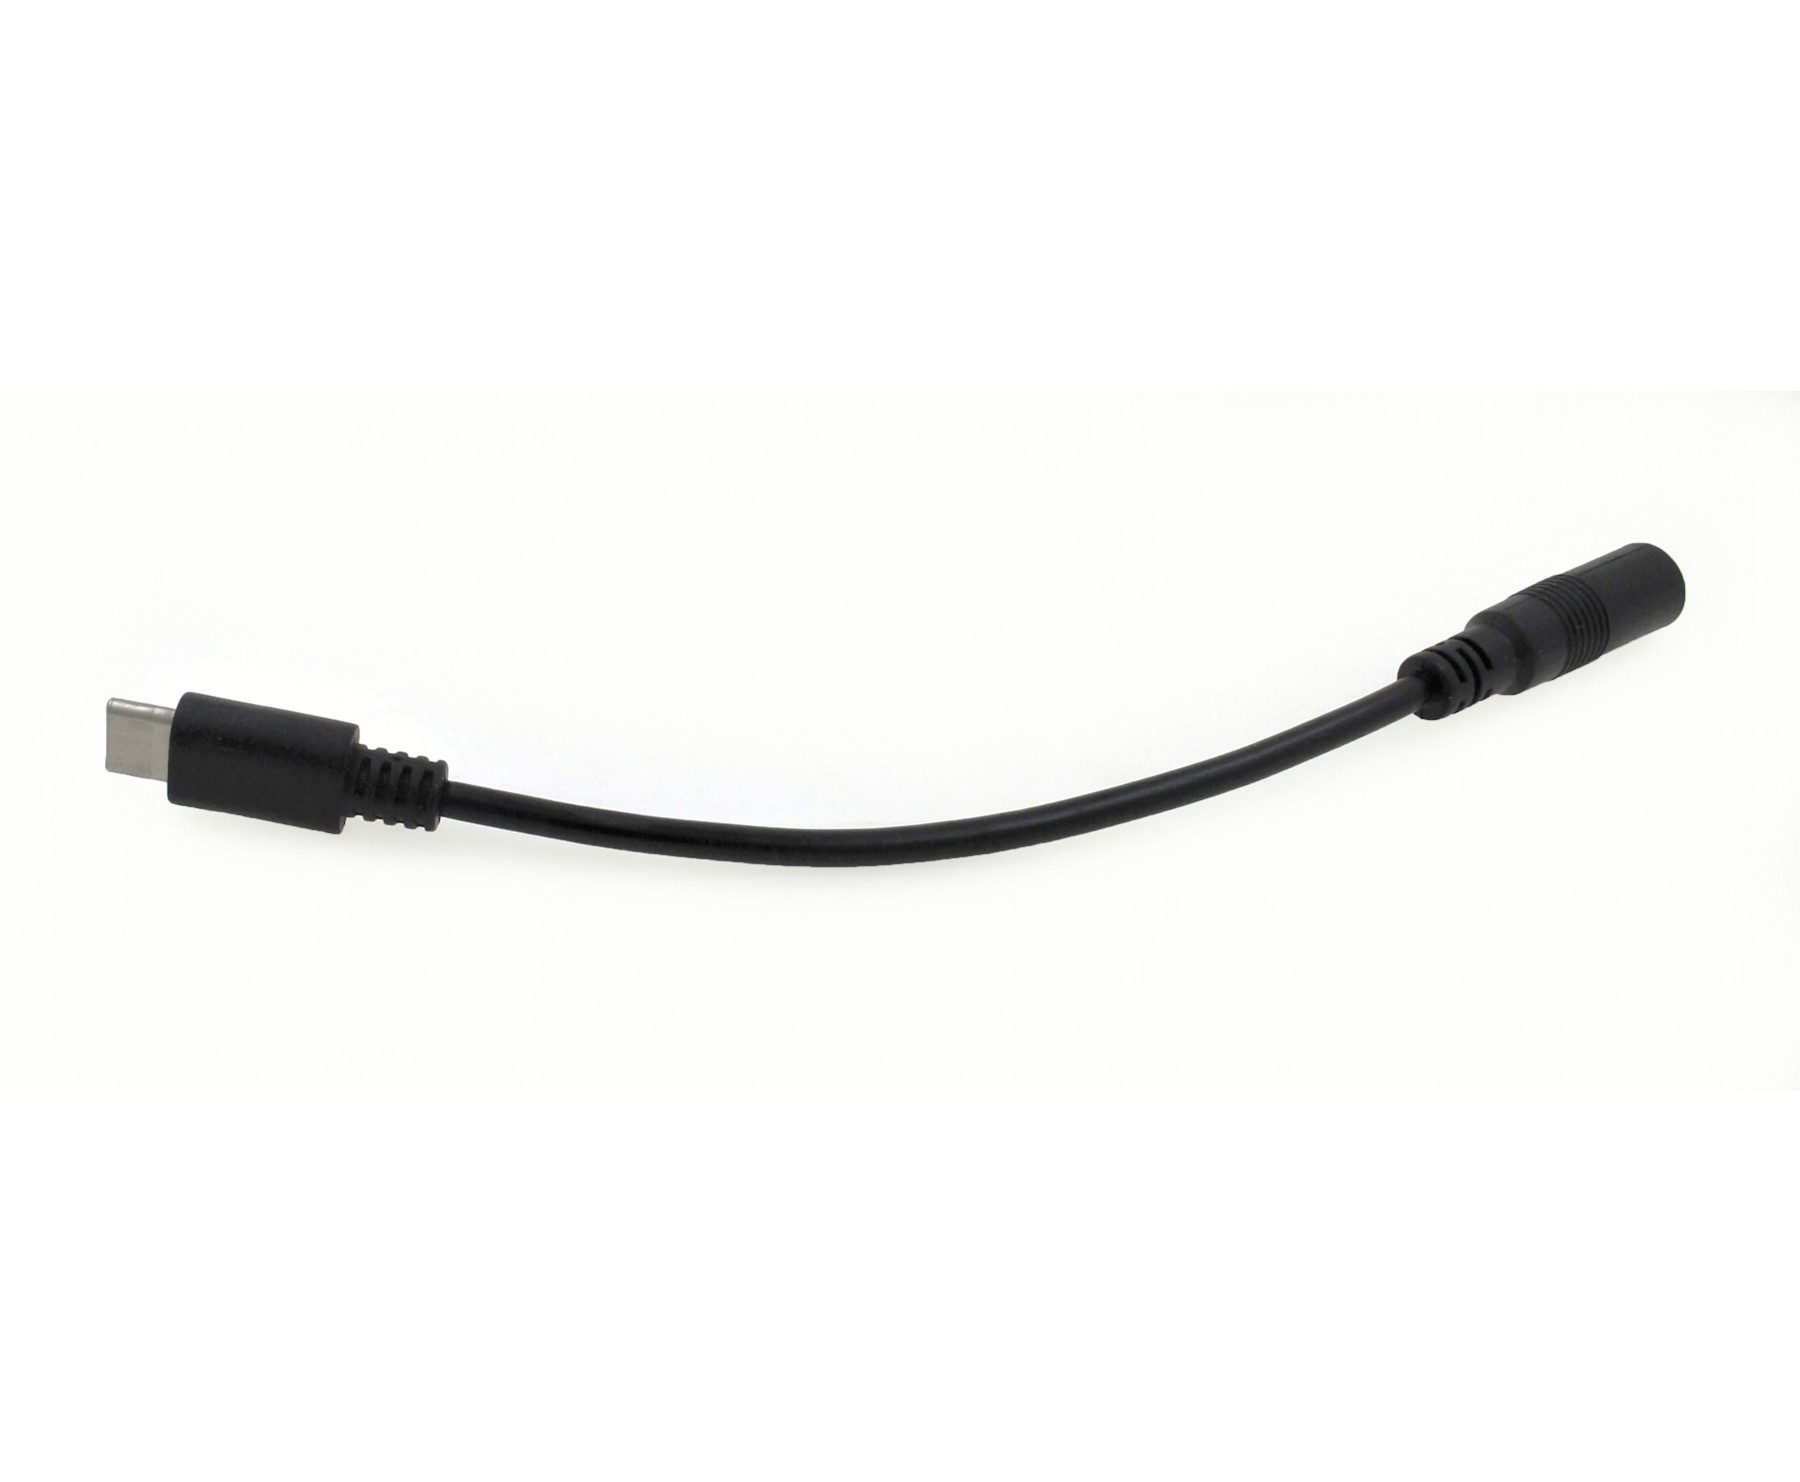 DCToTypeC USB Adapter Cable